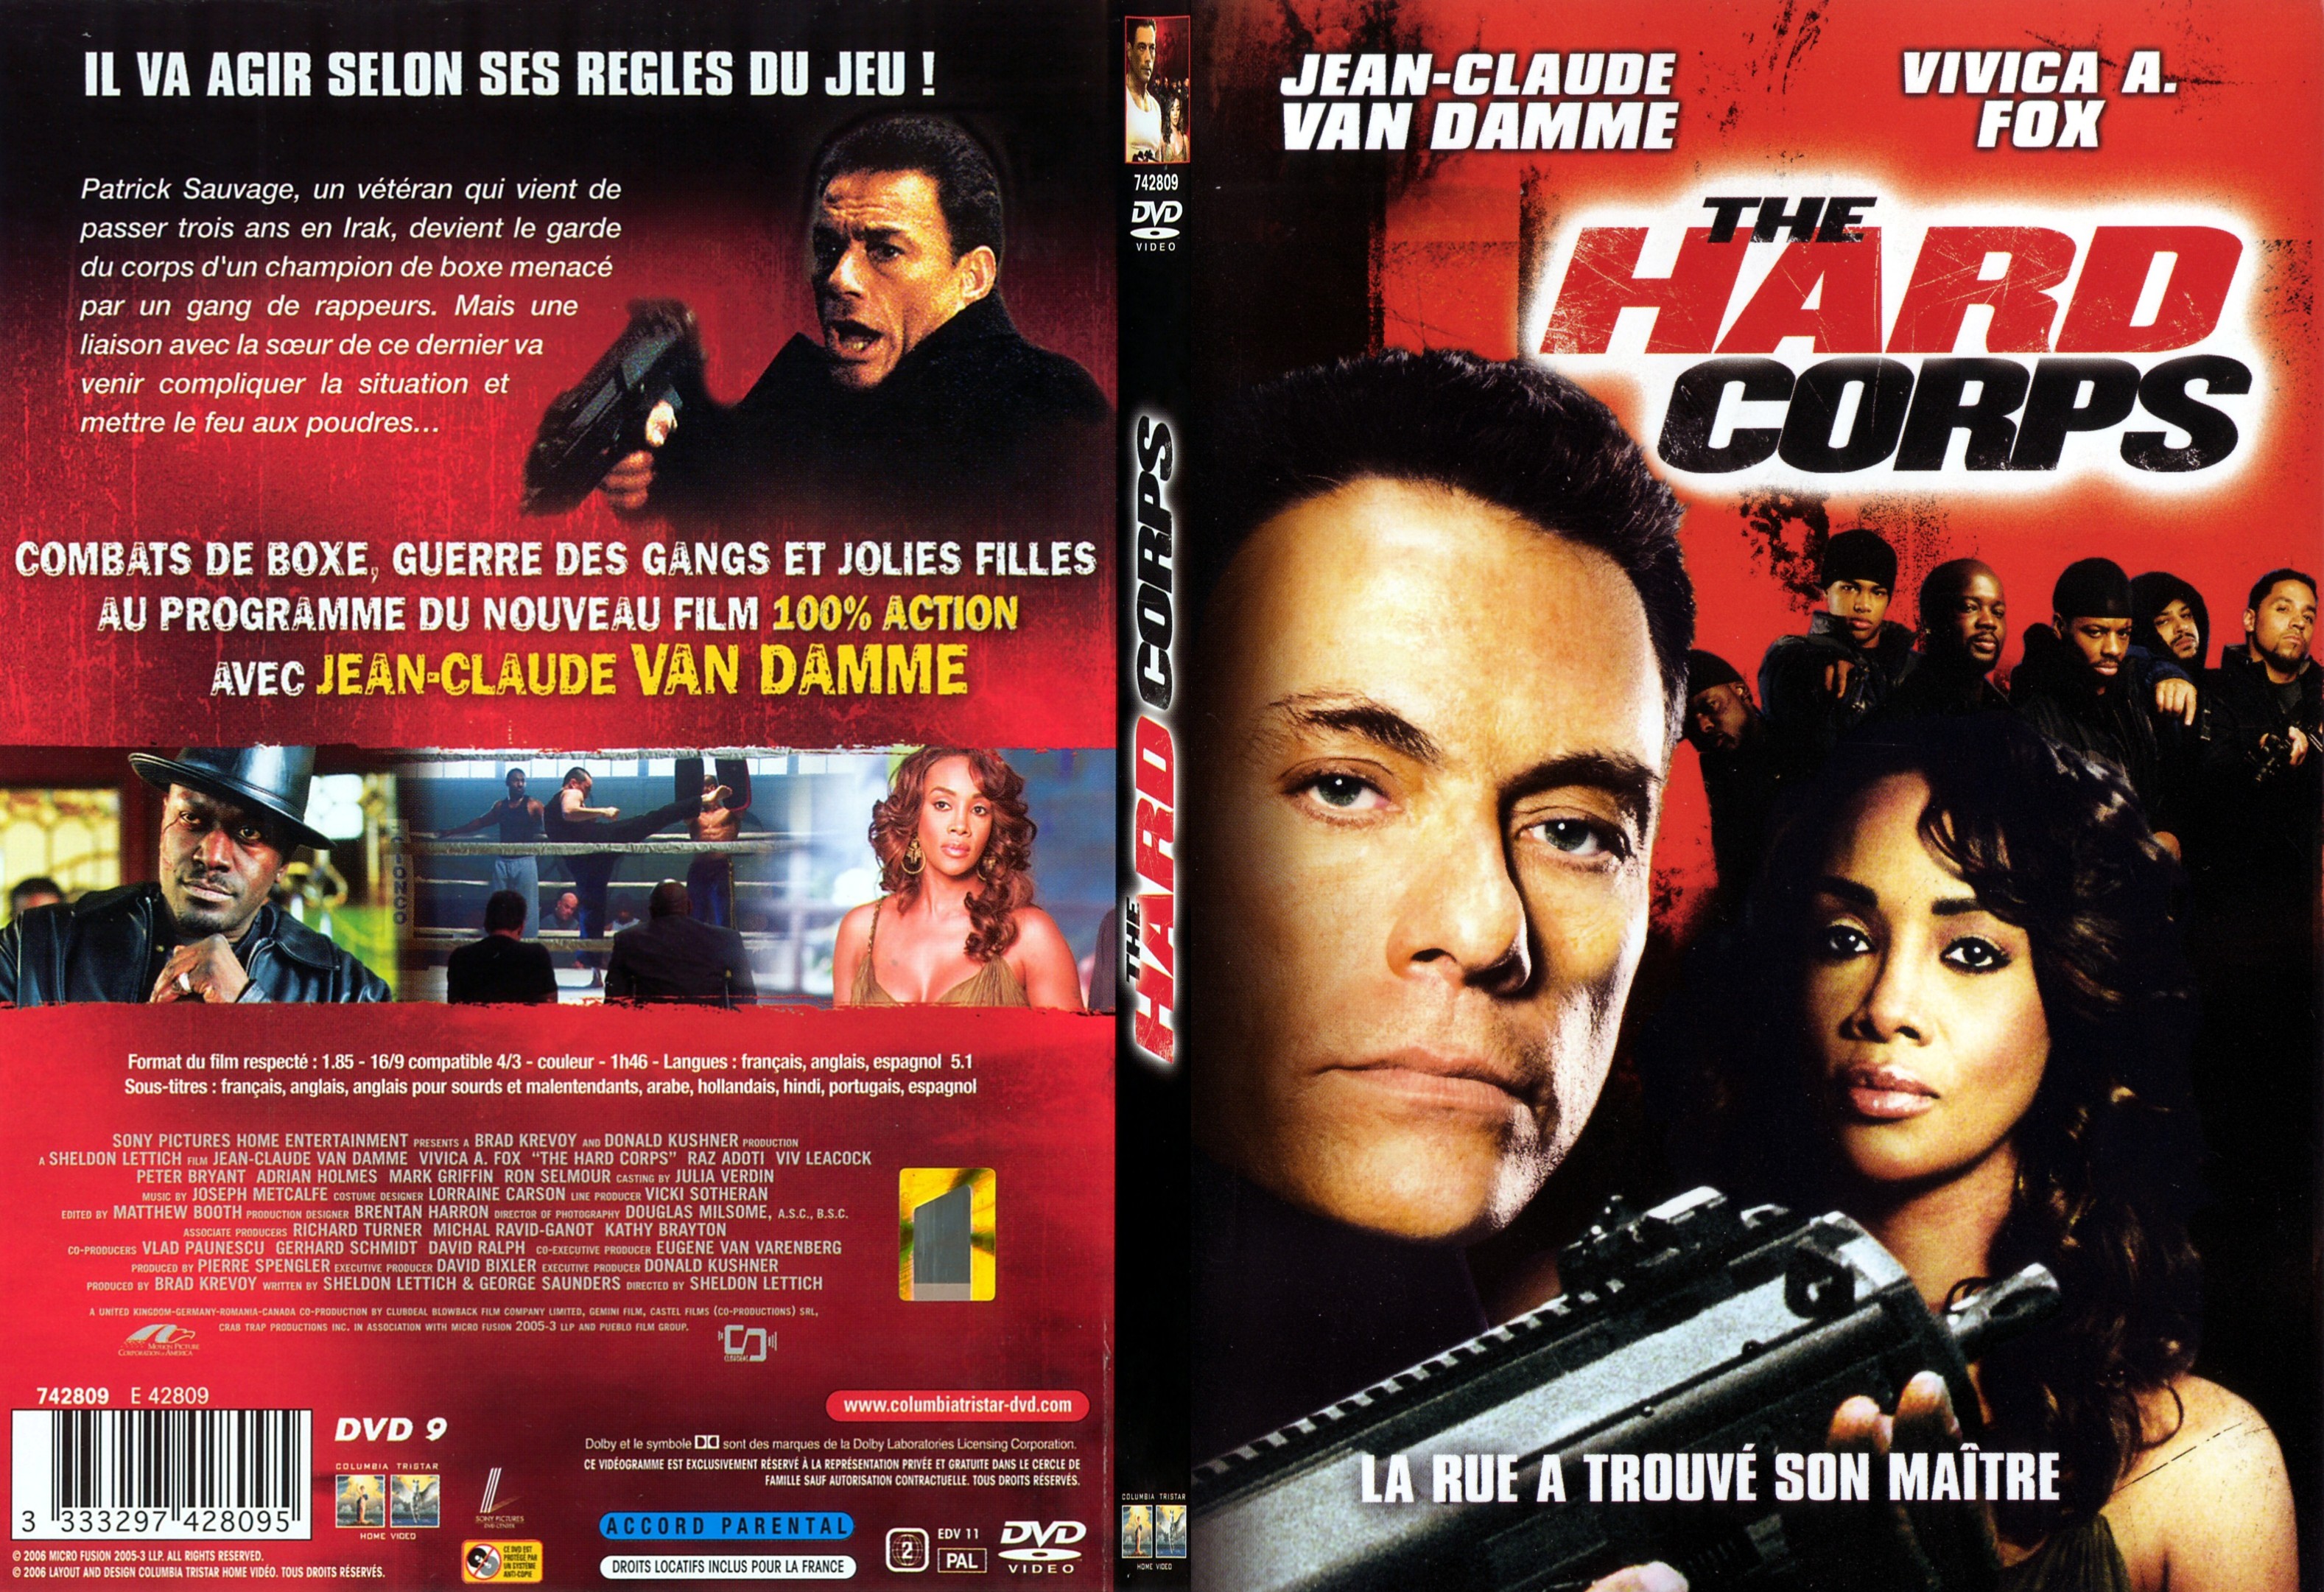 Jaquette DVD The hard corps - SLIM